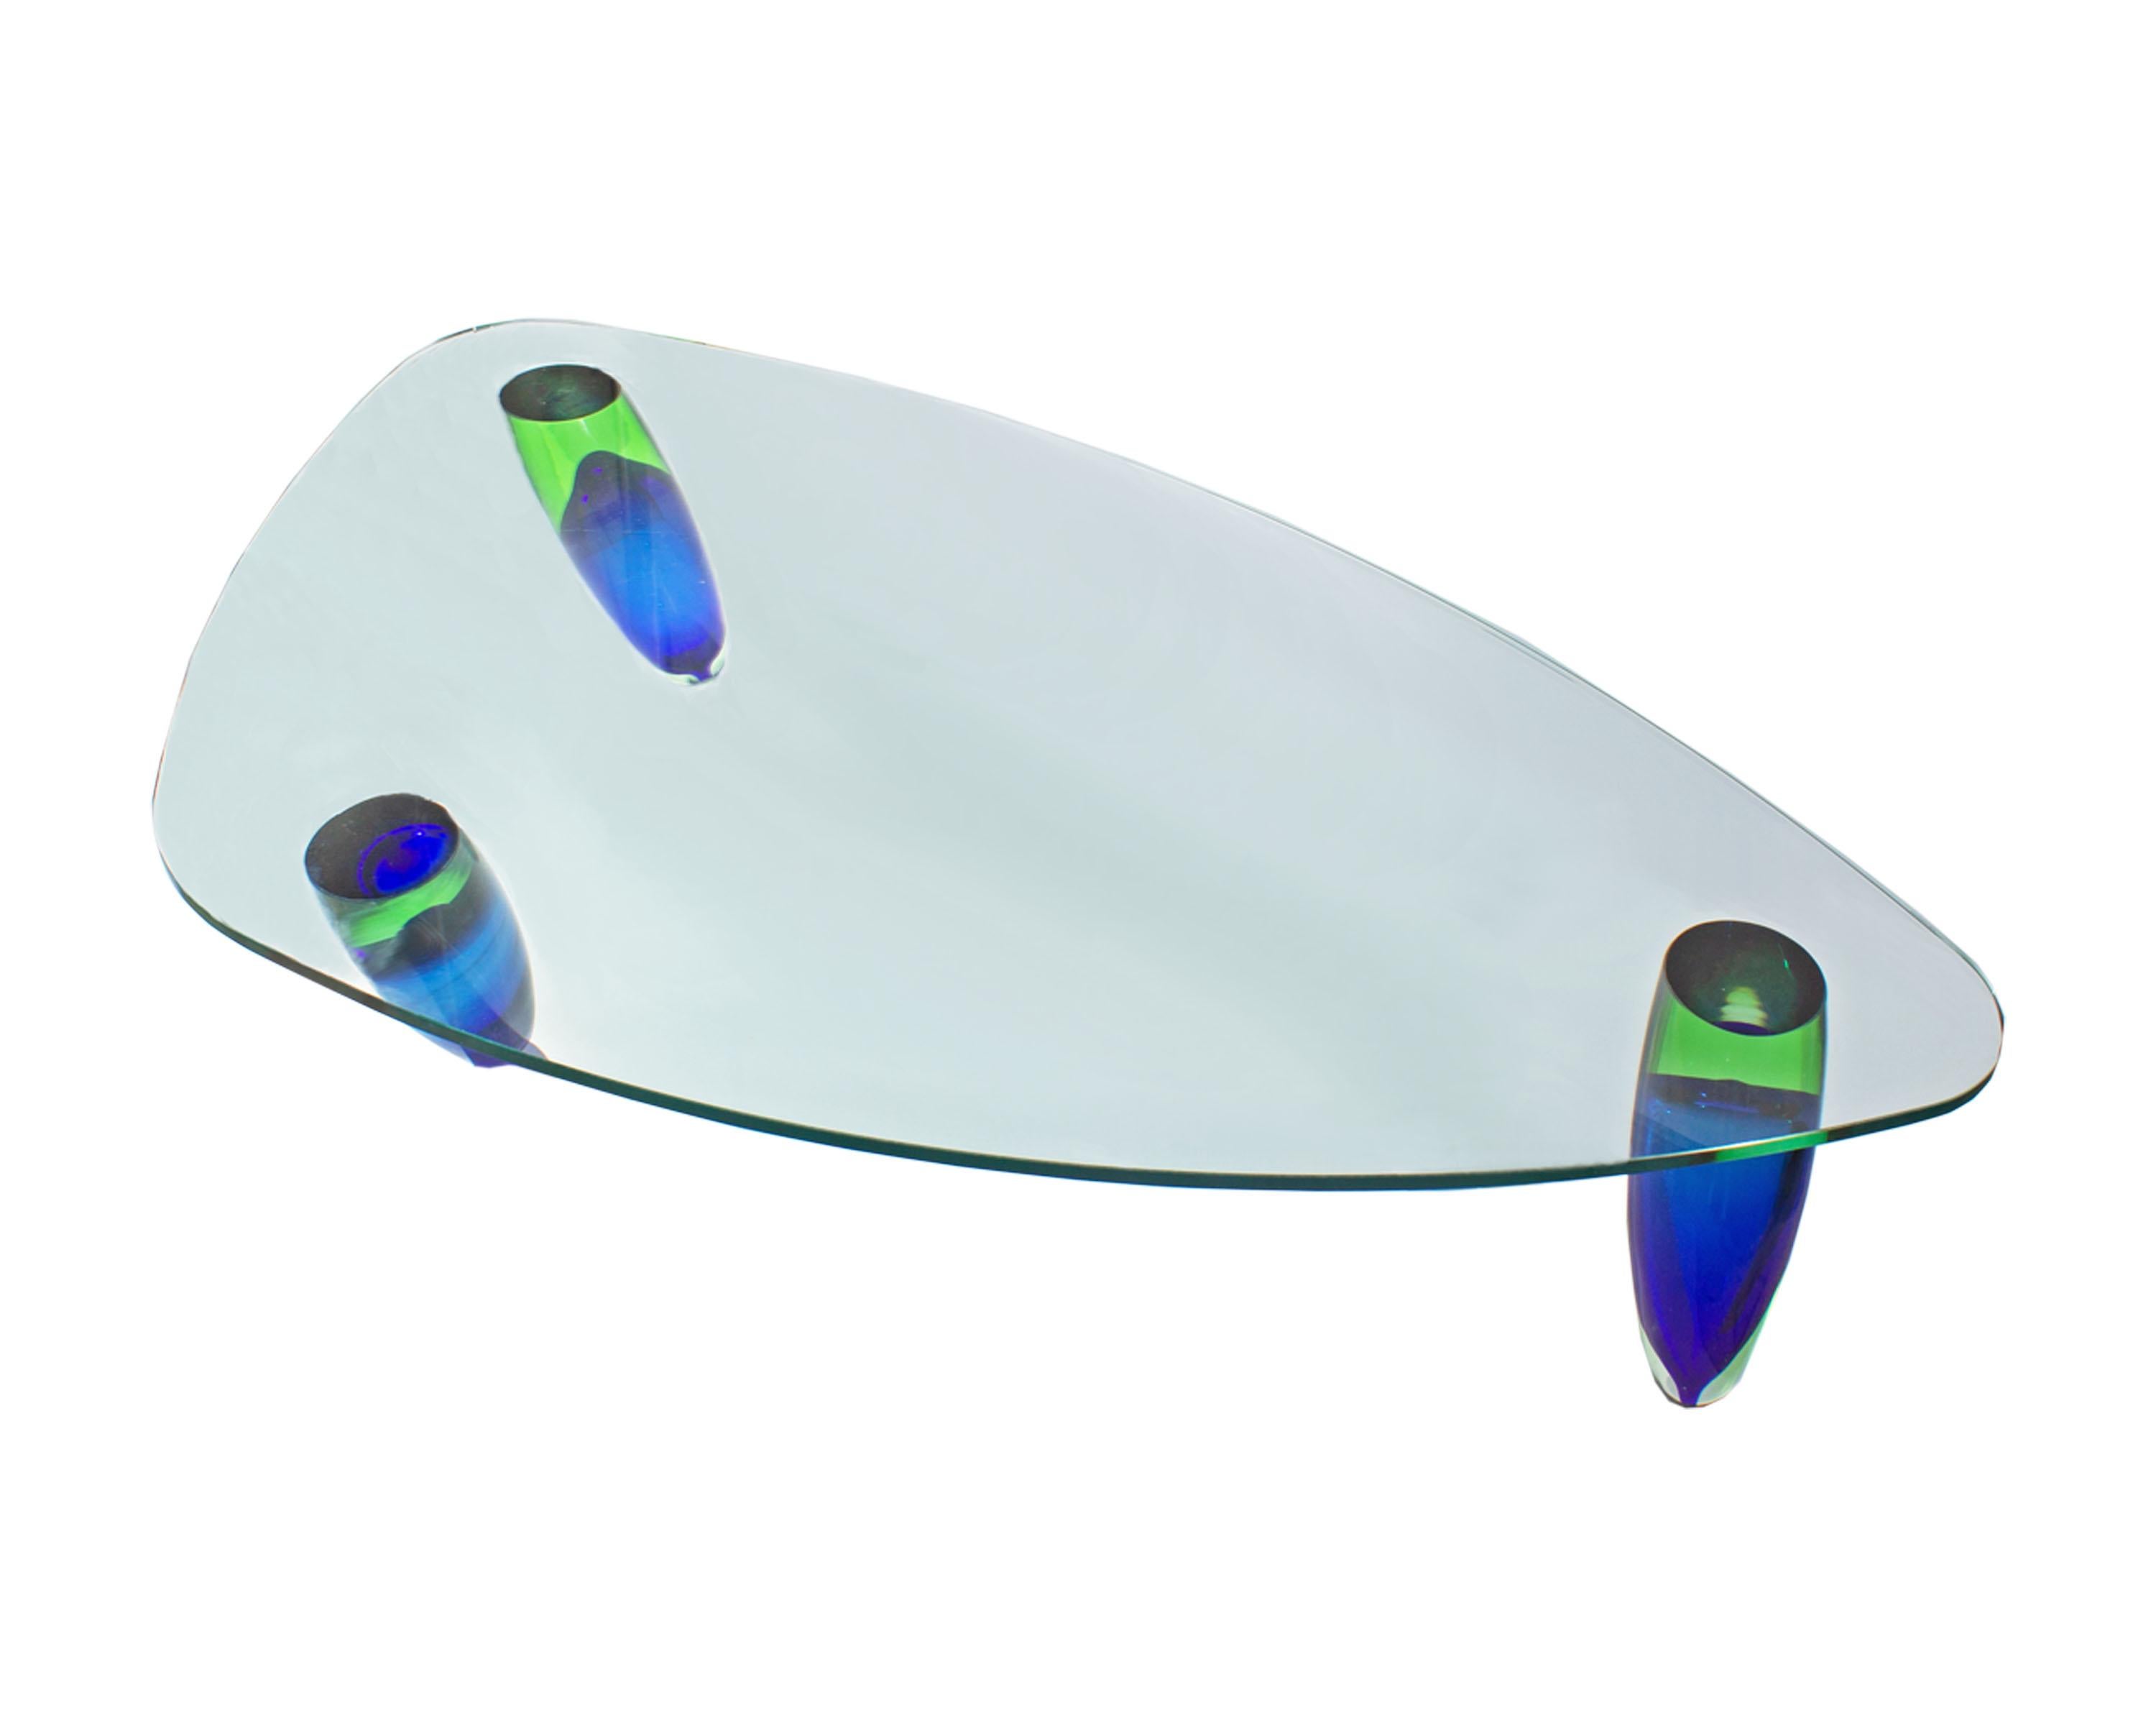 A Postmodern Murano glass coffee table designed by Italian designer Maurice Barilone (born 1947) for Roche Bobois. Three bullet-shaped green and blue legs support a clear triangular-shaped table top with rounded corners. Each Sommerso leg glass